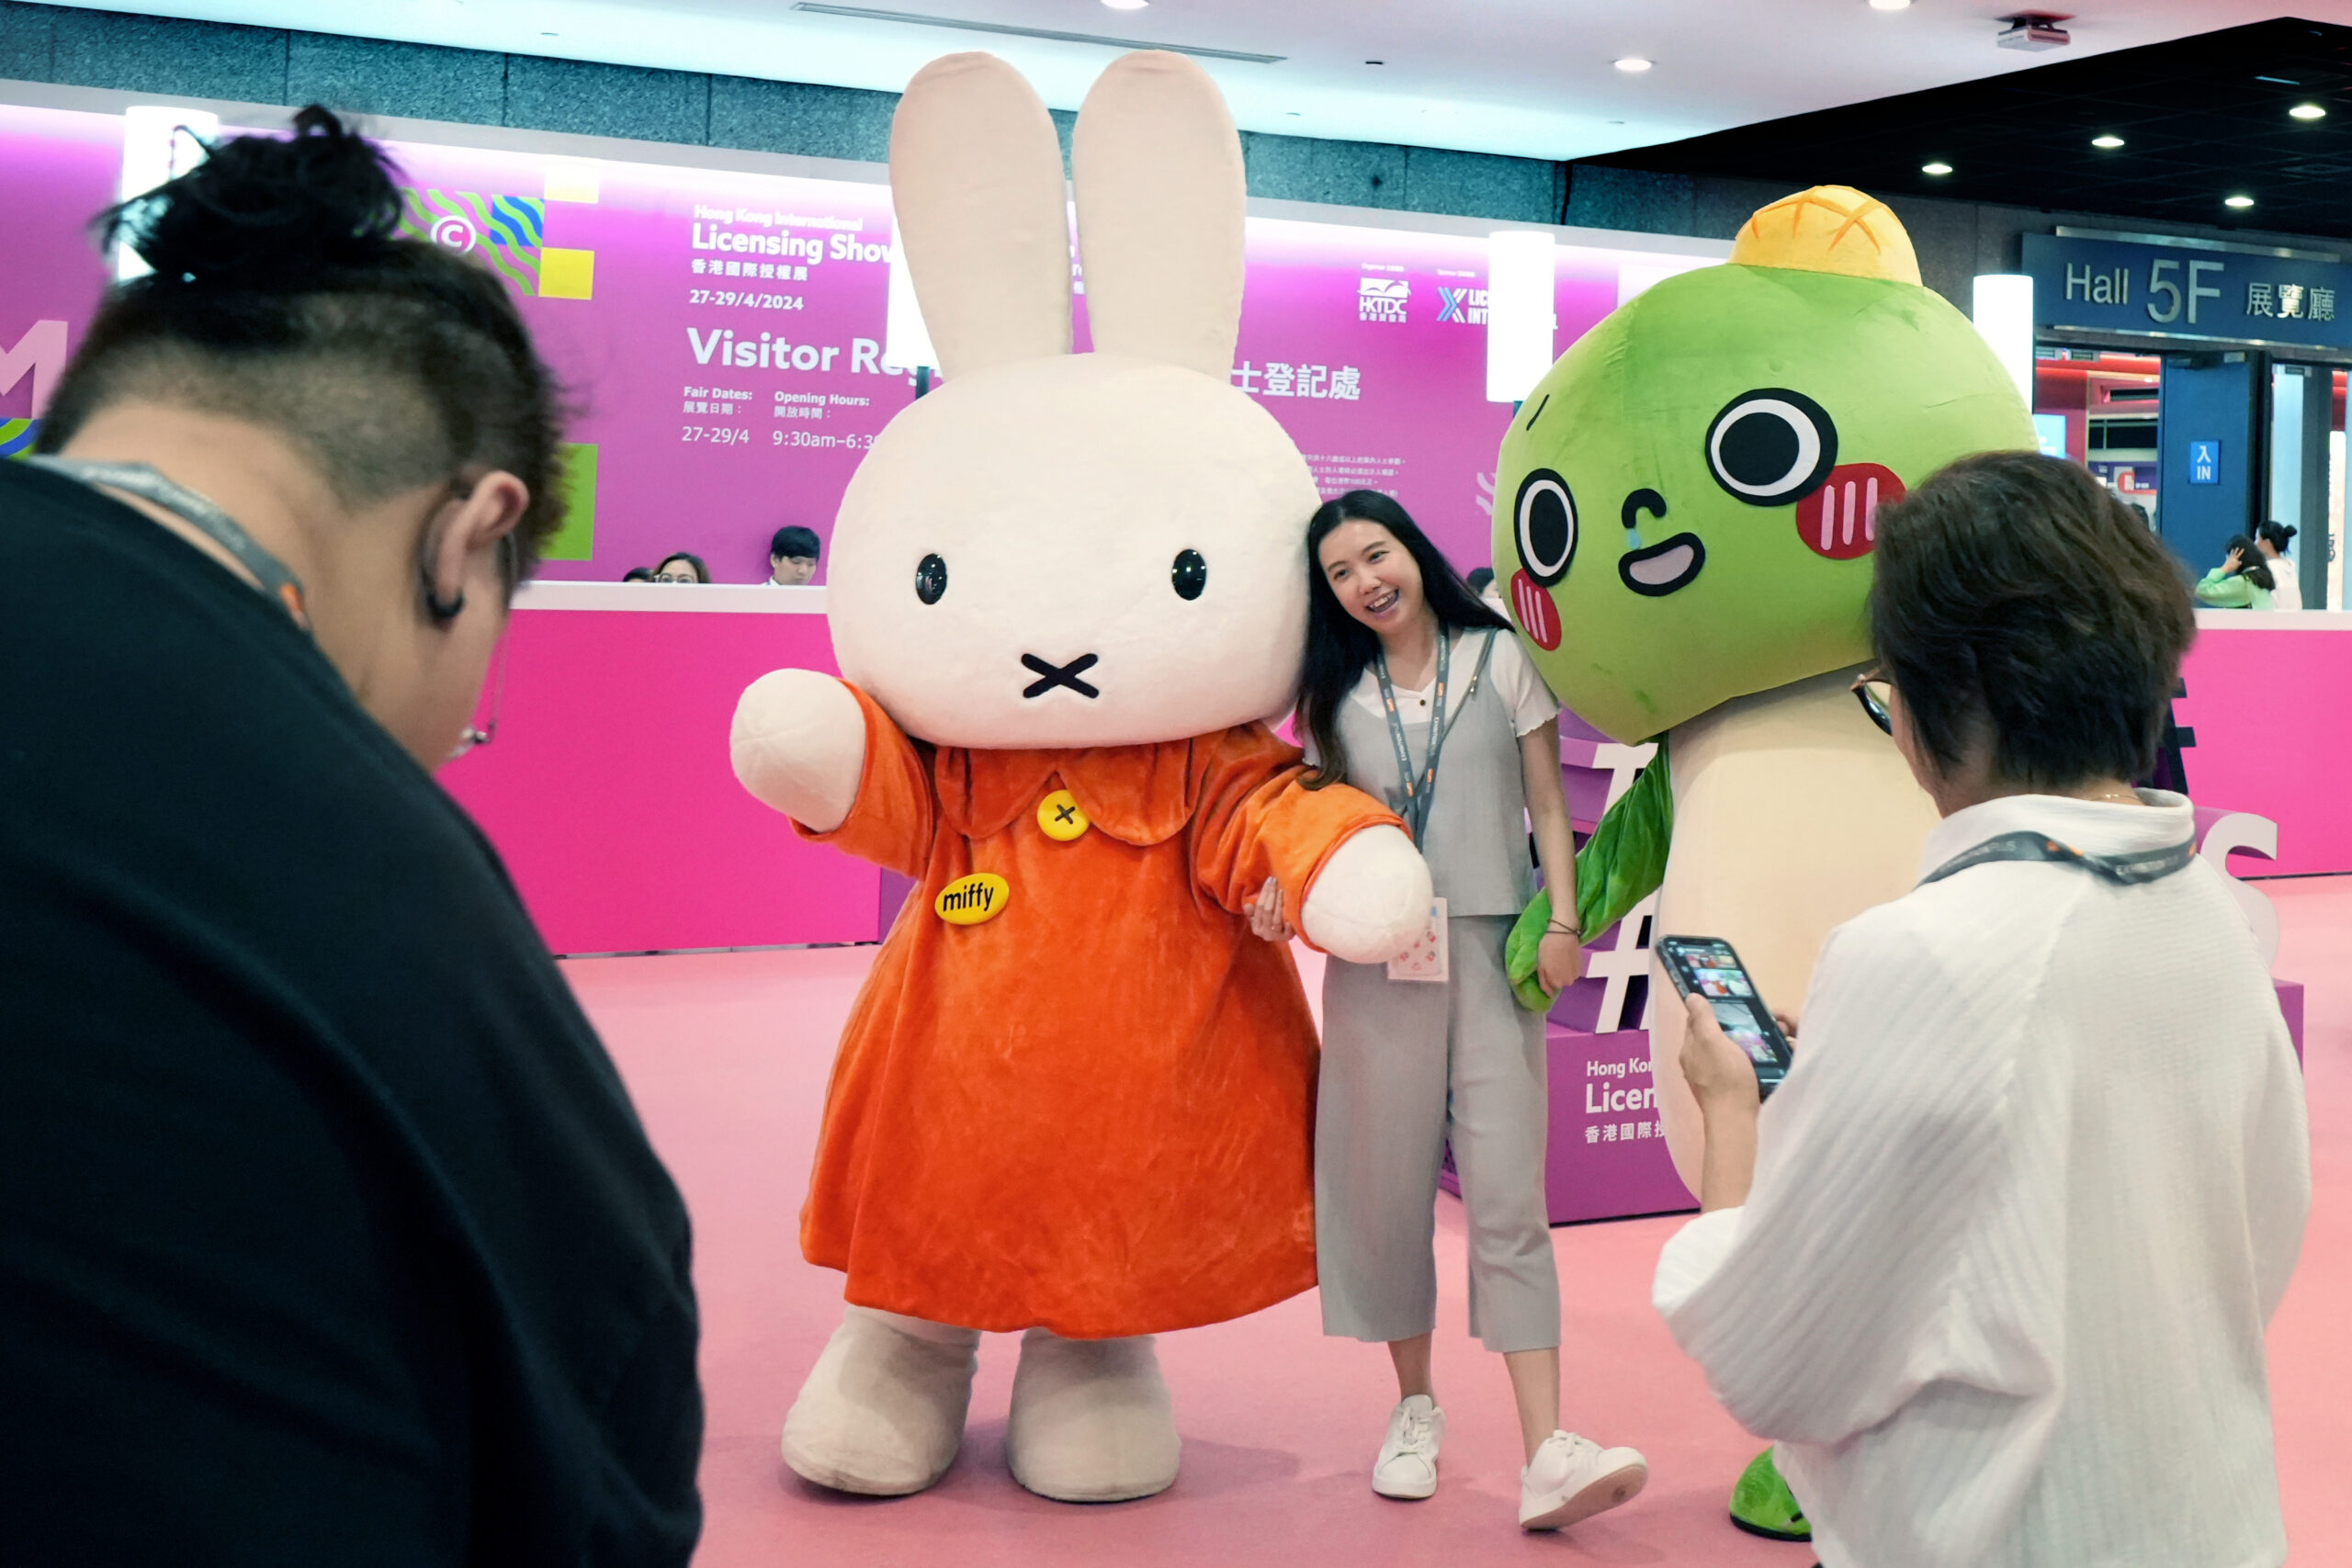 Happy photoshoot with lovely cartoon mascots at the Licensing Show!